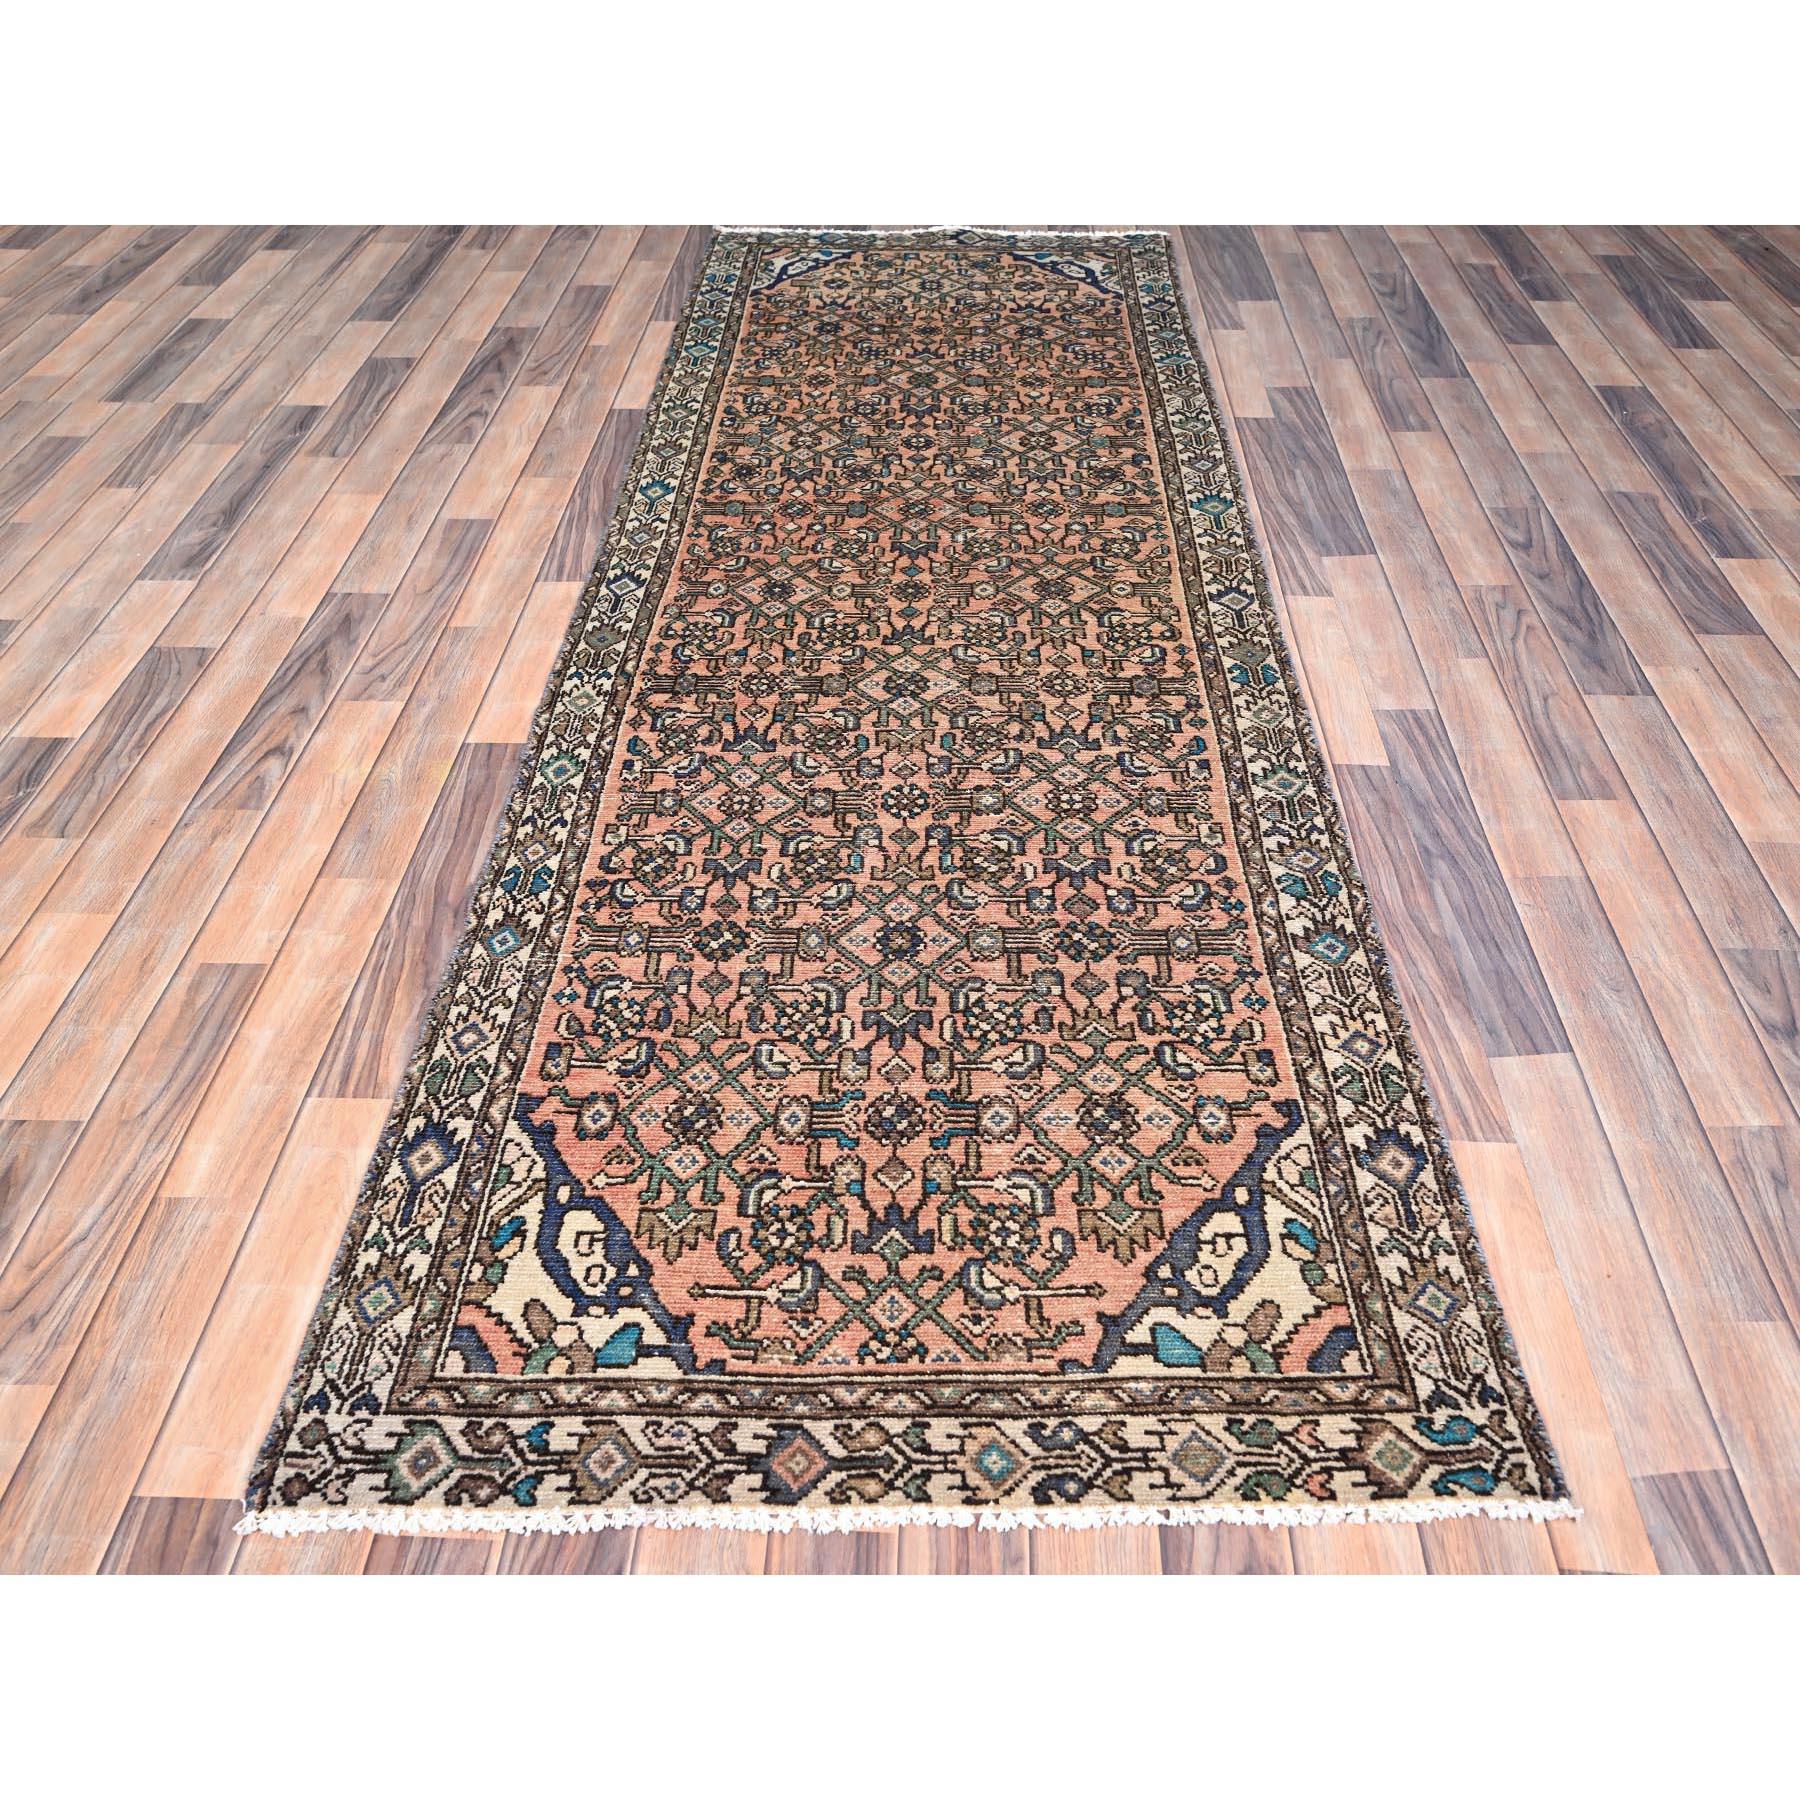 Medieval Brown Clean Distressed Look Old Persian Hussainabad Wool Runner Hand Knotted Rug For Sale